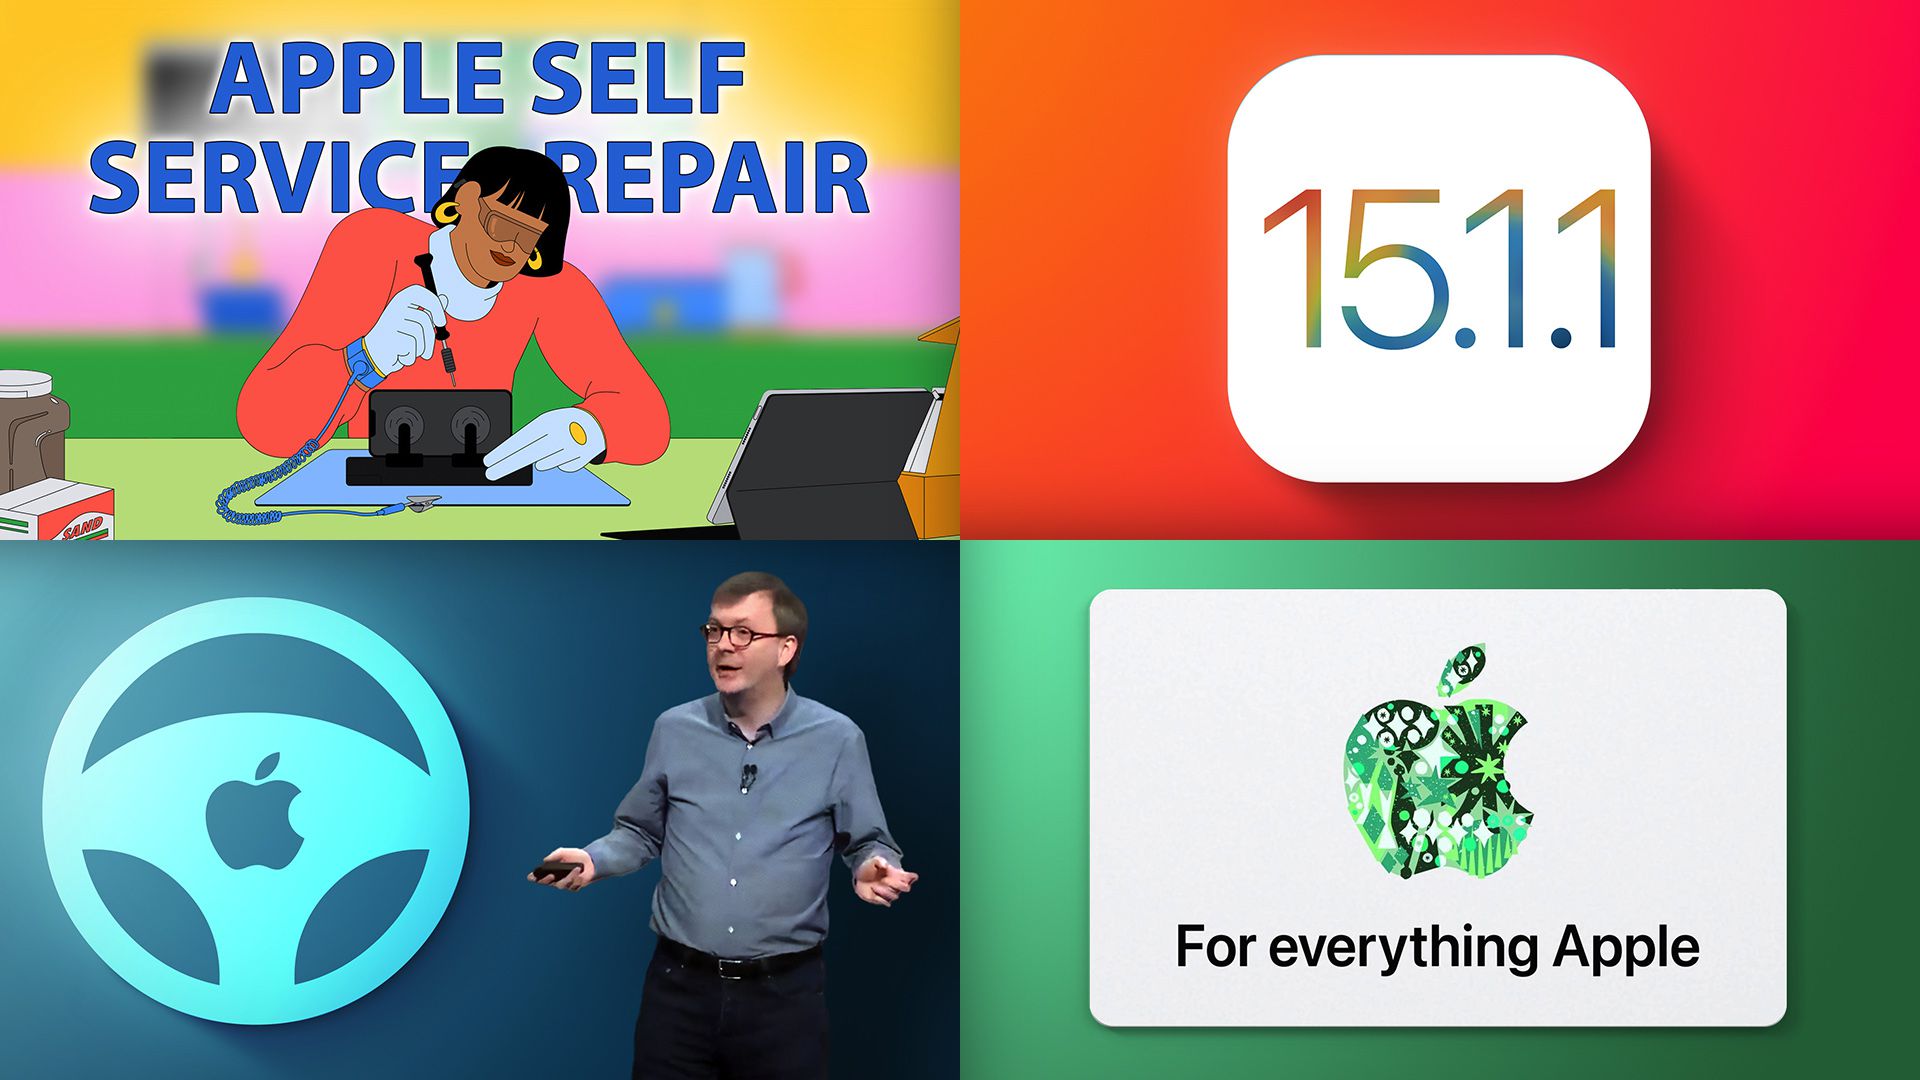 Top Stories: Apple Self Service Repair, iOS 15.1.1 Released, and More